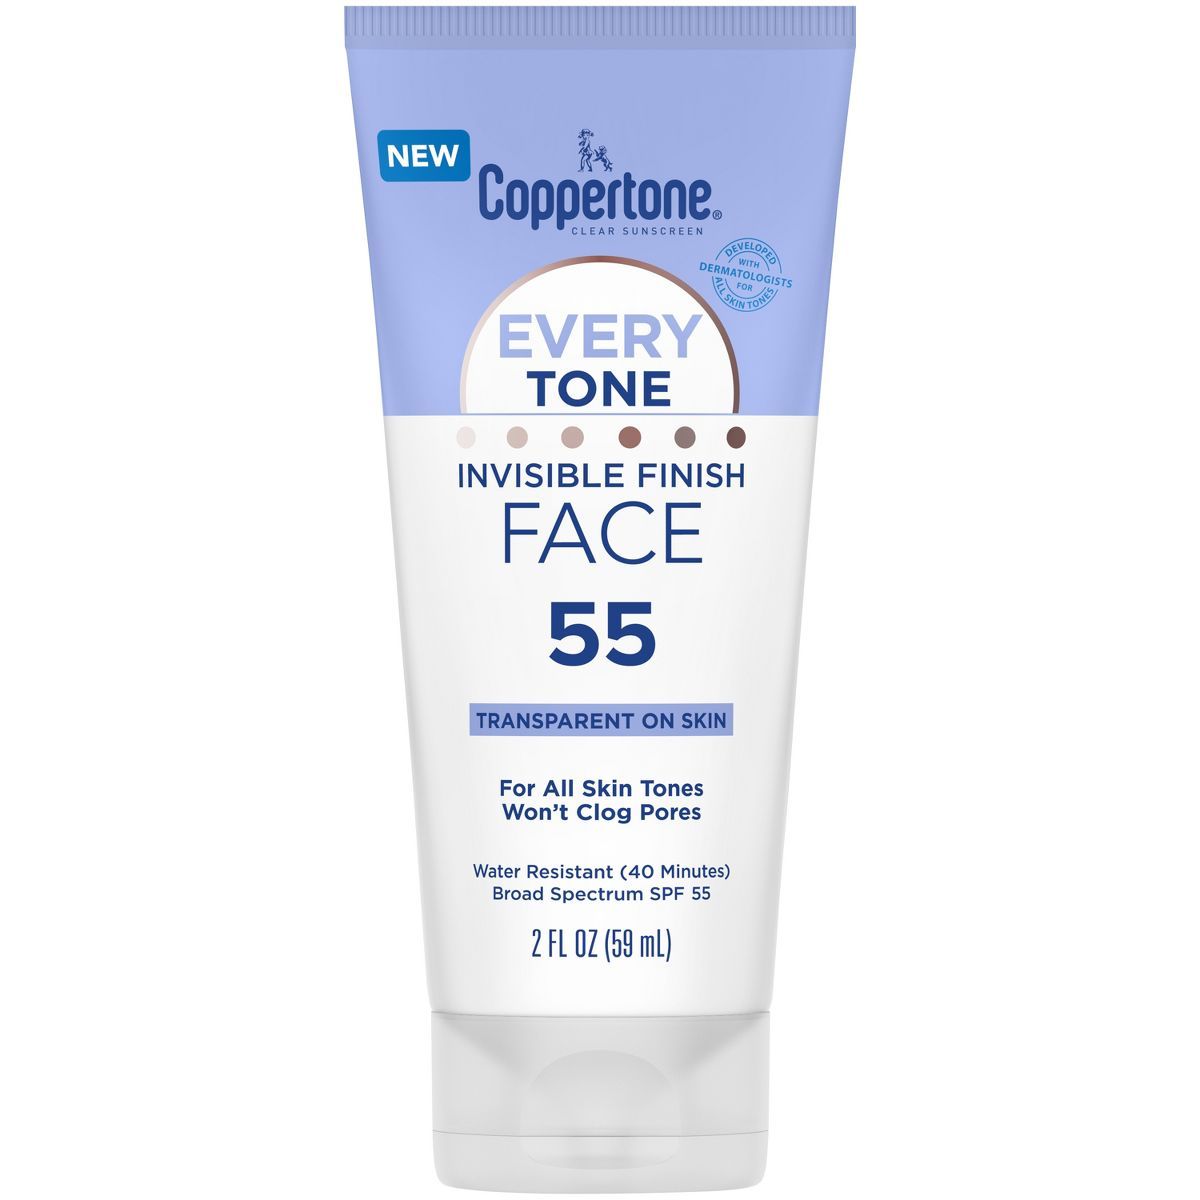 Coppertone Every Tone Face Sunscreen Lotion - SPF 55 - 2 fl oz | Target